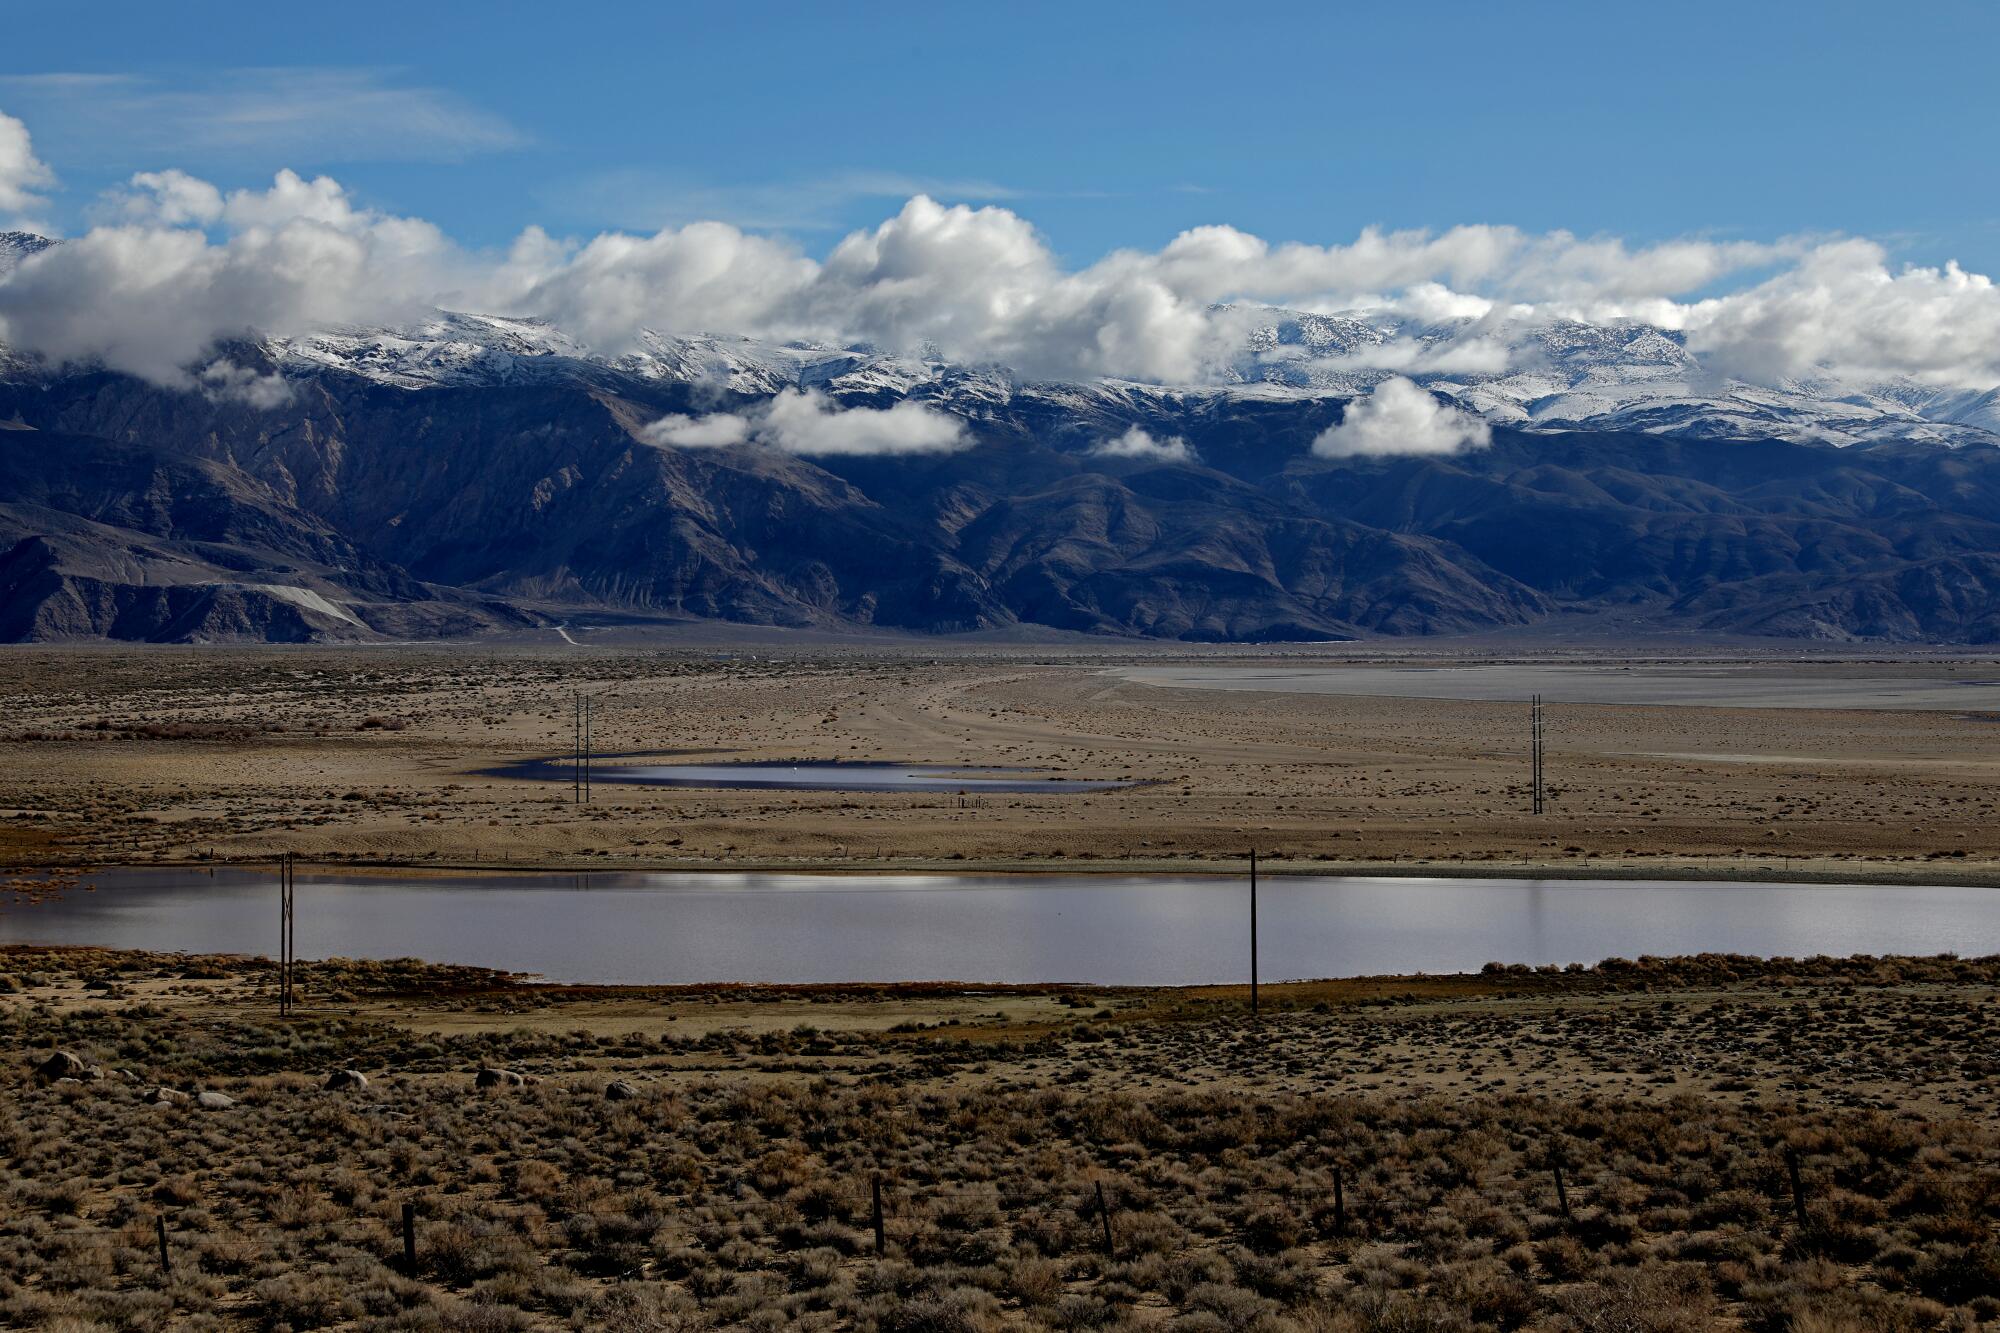 Owens Lake and the Owens Valley with the White Mountains seen in the background on Thursday.